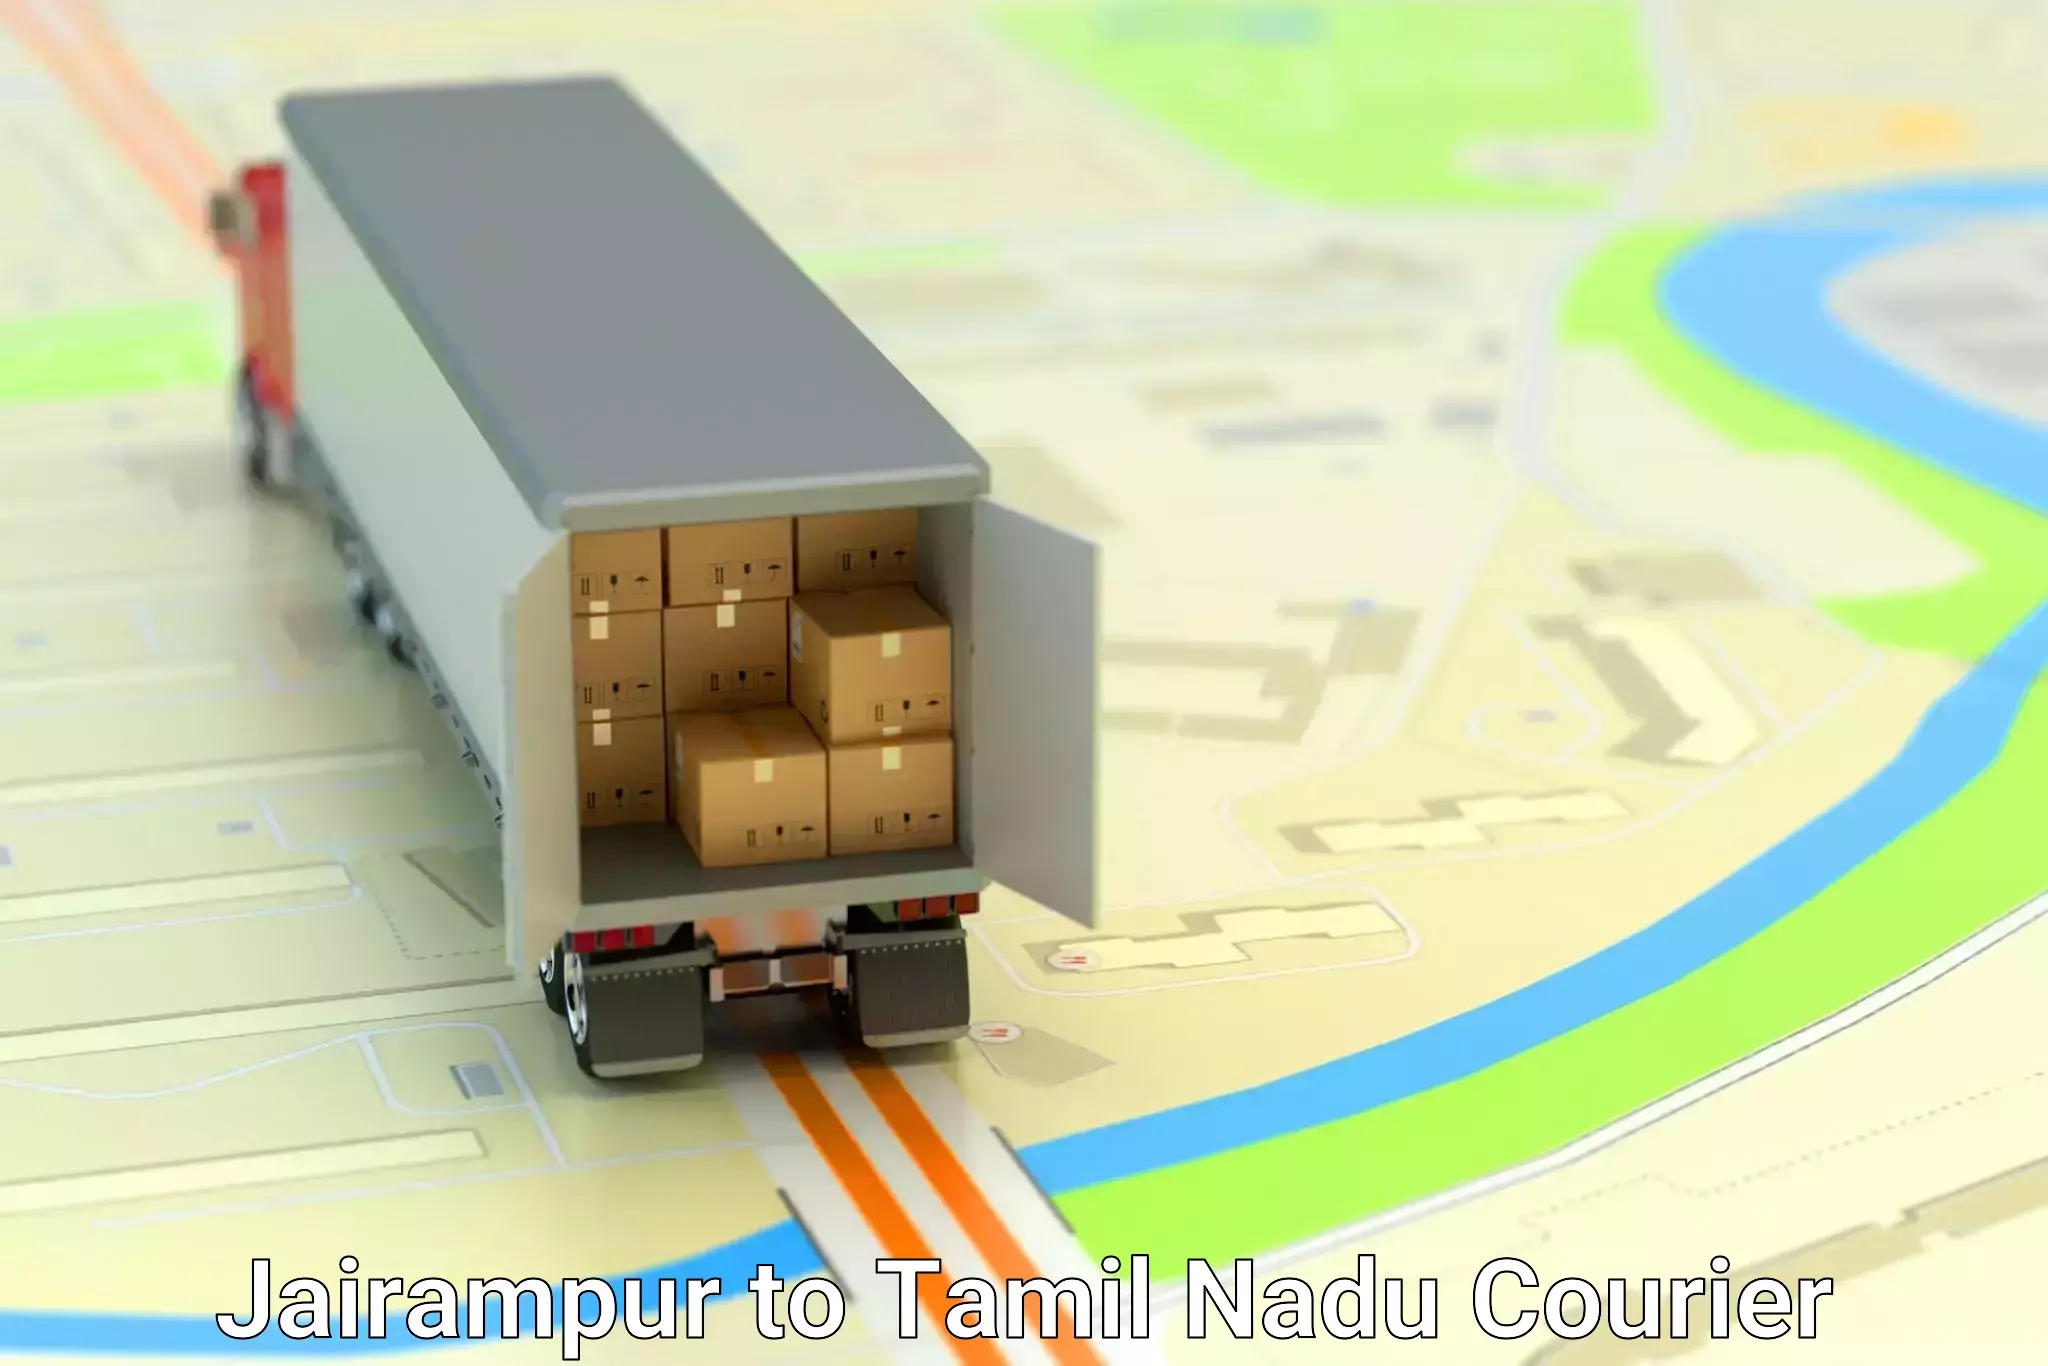 Rapid shipping services Jairampur to Sri Ramachandra Institute of Higher Education and Research Chennai